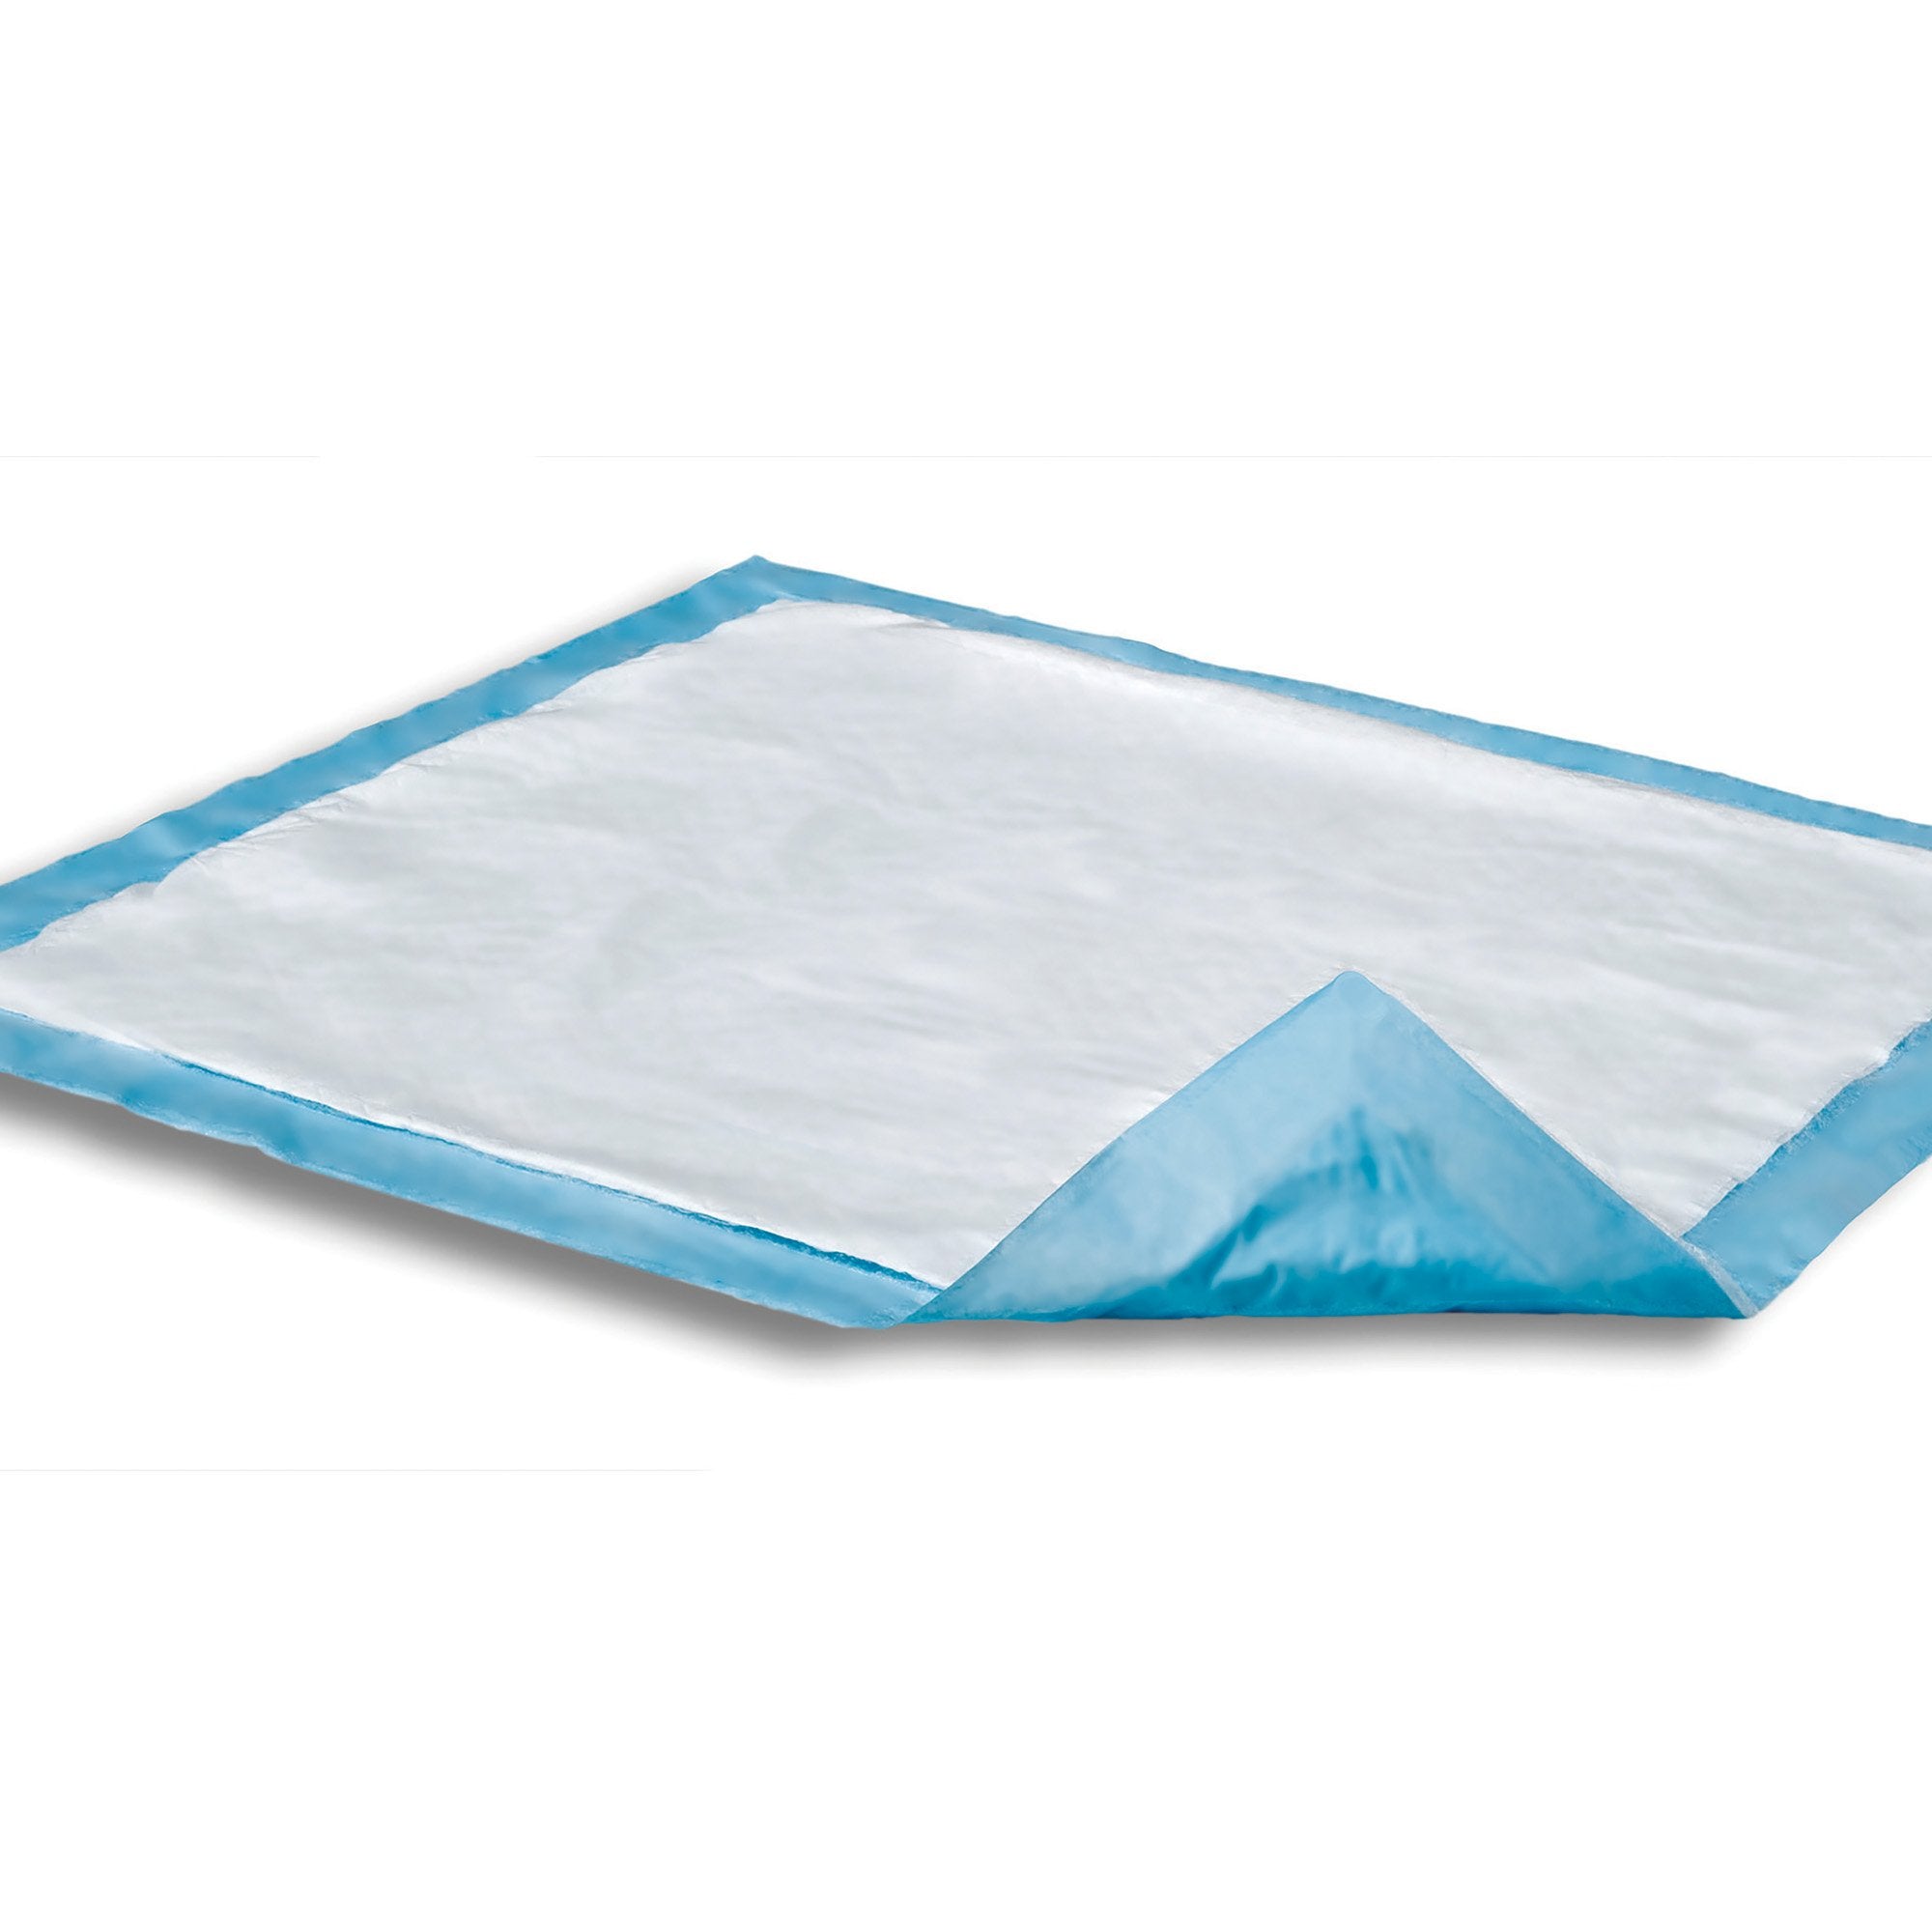 Disposable Underpad Attends® Care Dri-Sorb® 30 X 30 Inch Cellulose / Polymer Heavy Absorbency